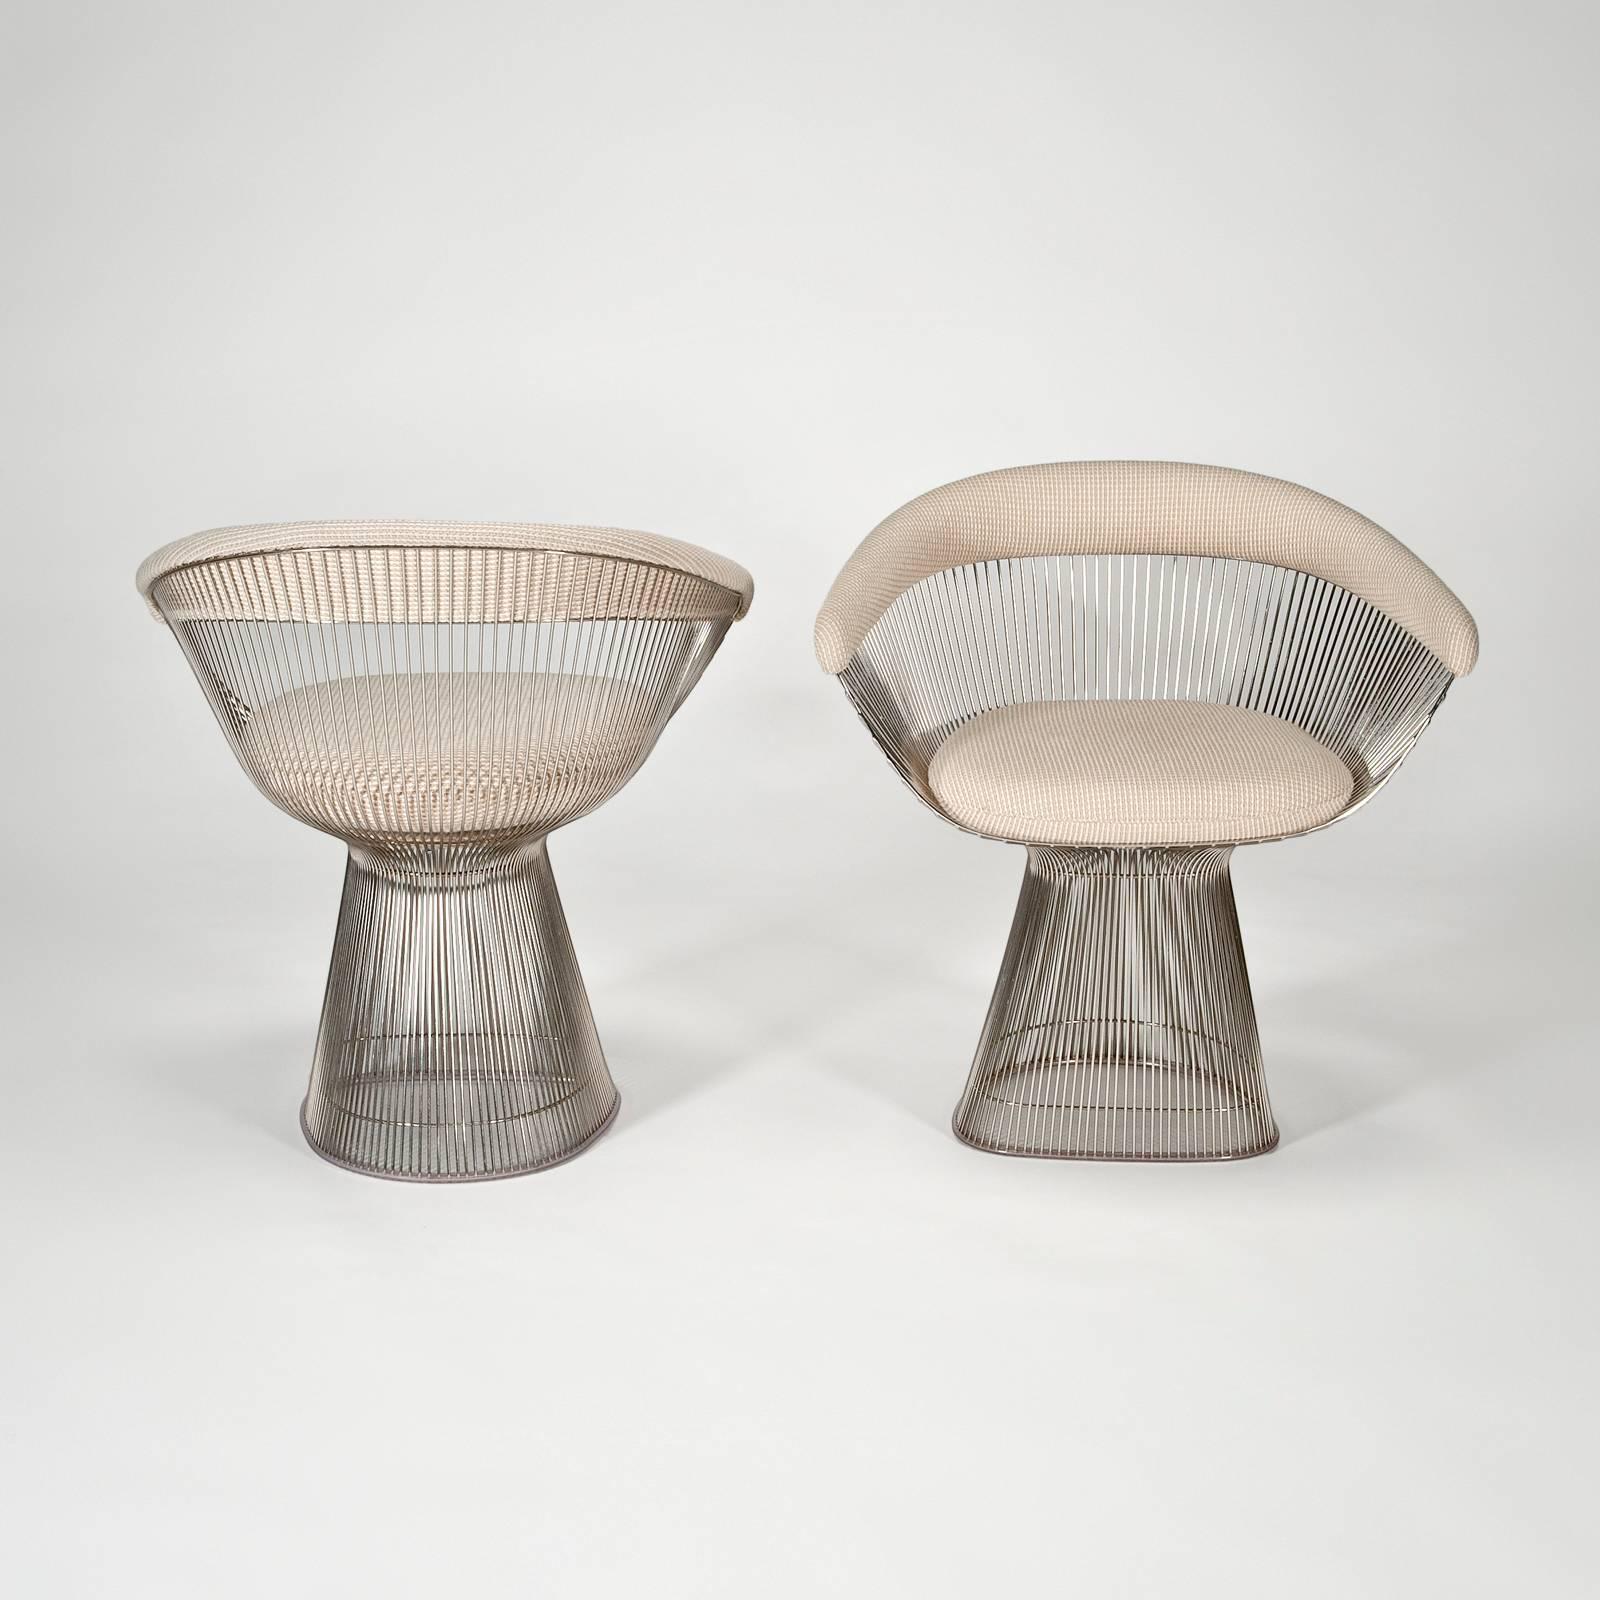 American Platner Dining Table and Six Chairs by Warren Platner for Knoll